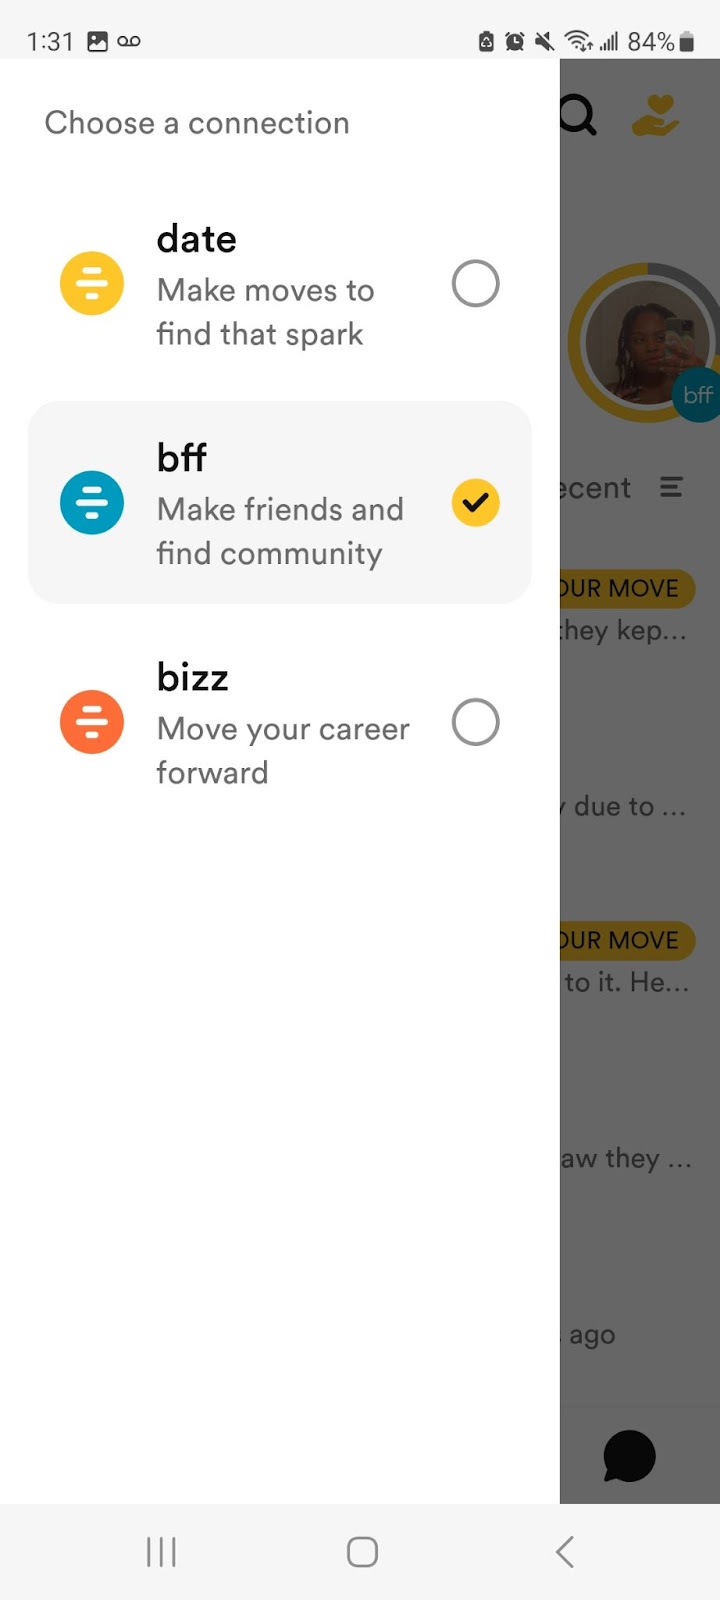 This shows them menu on the Bumble App with BumbleBFF selected